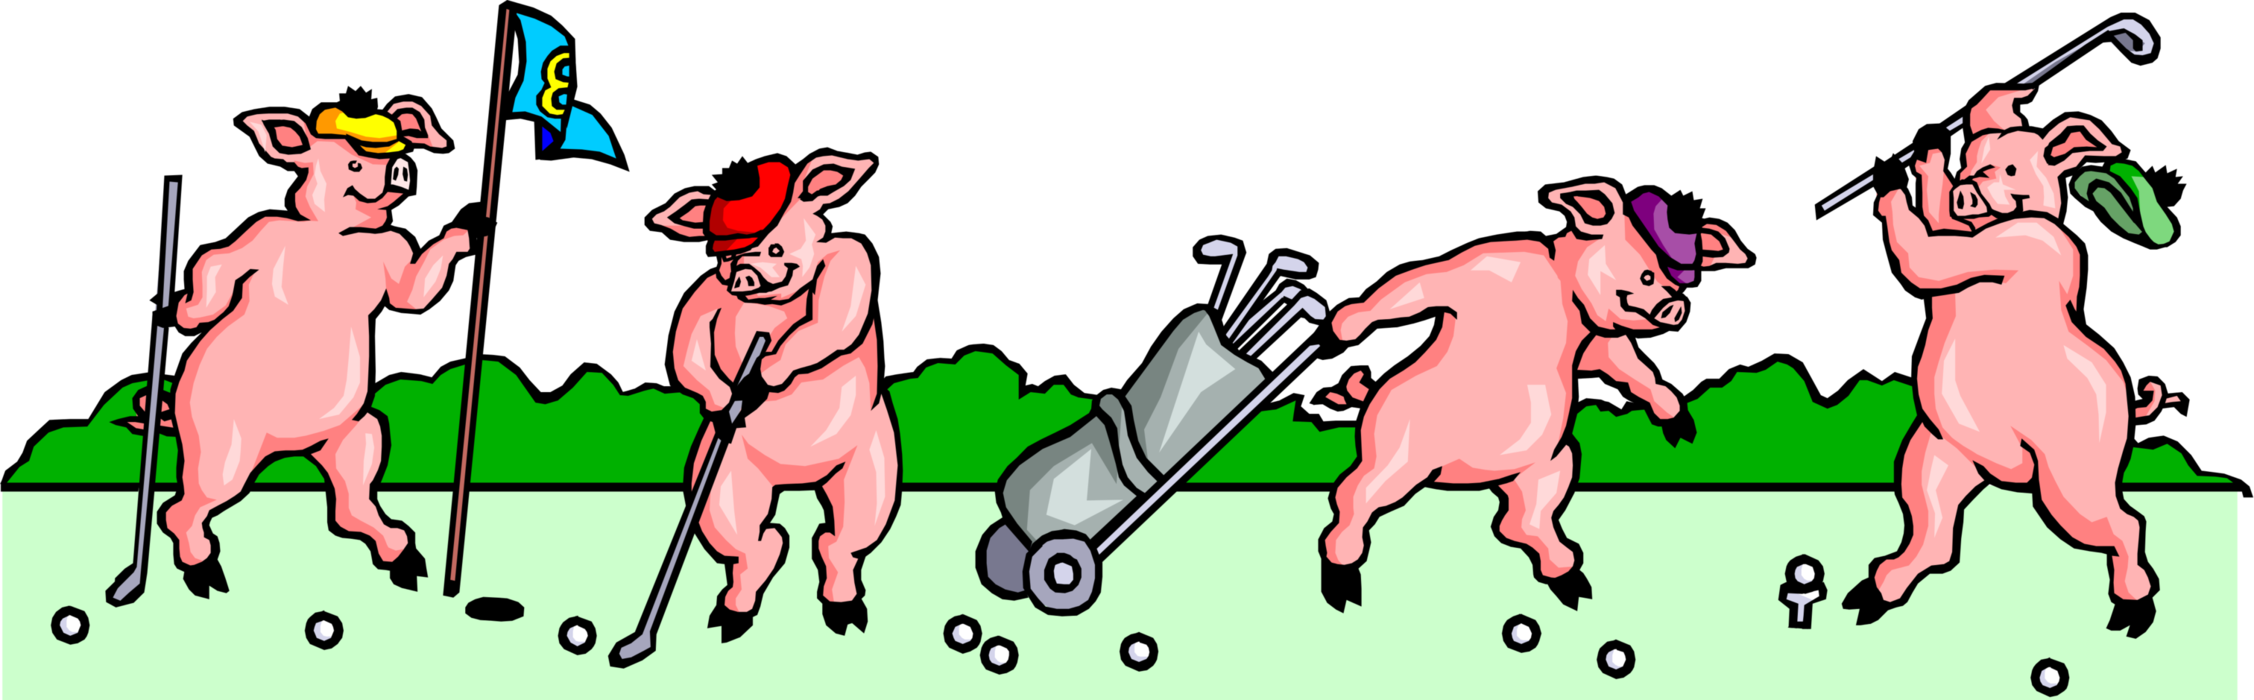 Vector Illustration of Sport of Golf Golfing Pigs Play Round of Golf